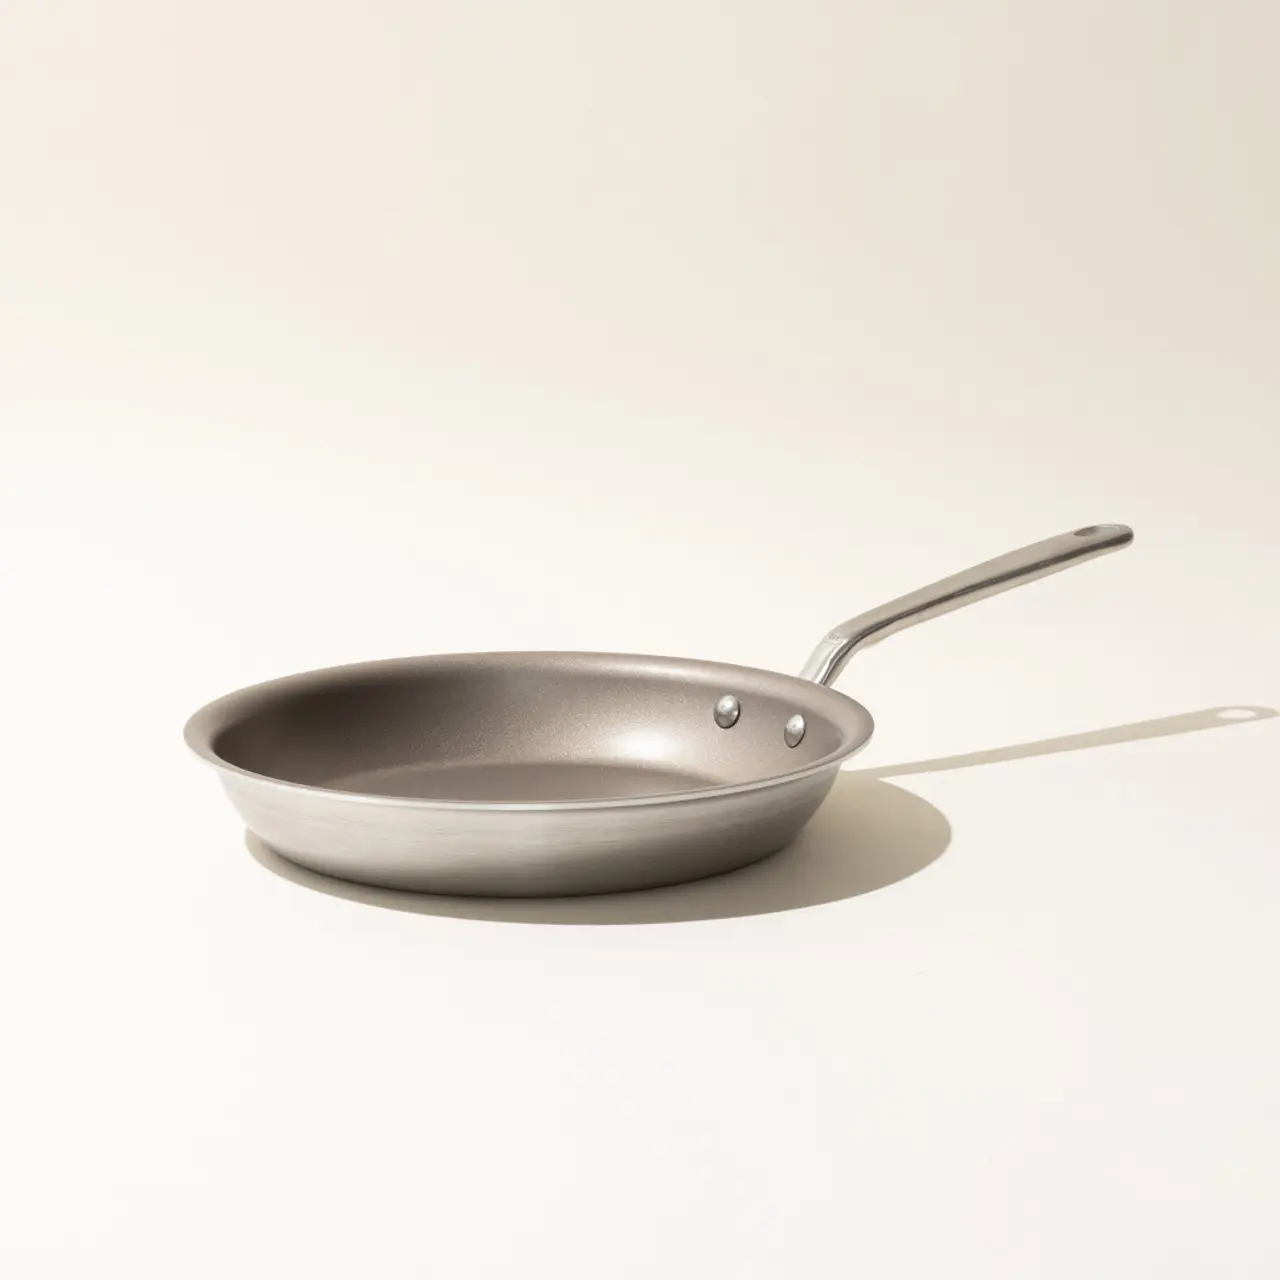 A single non-stick frying pan with a stainless steel handle on a neutral background.